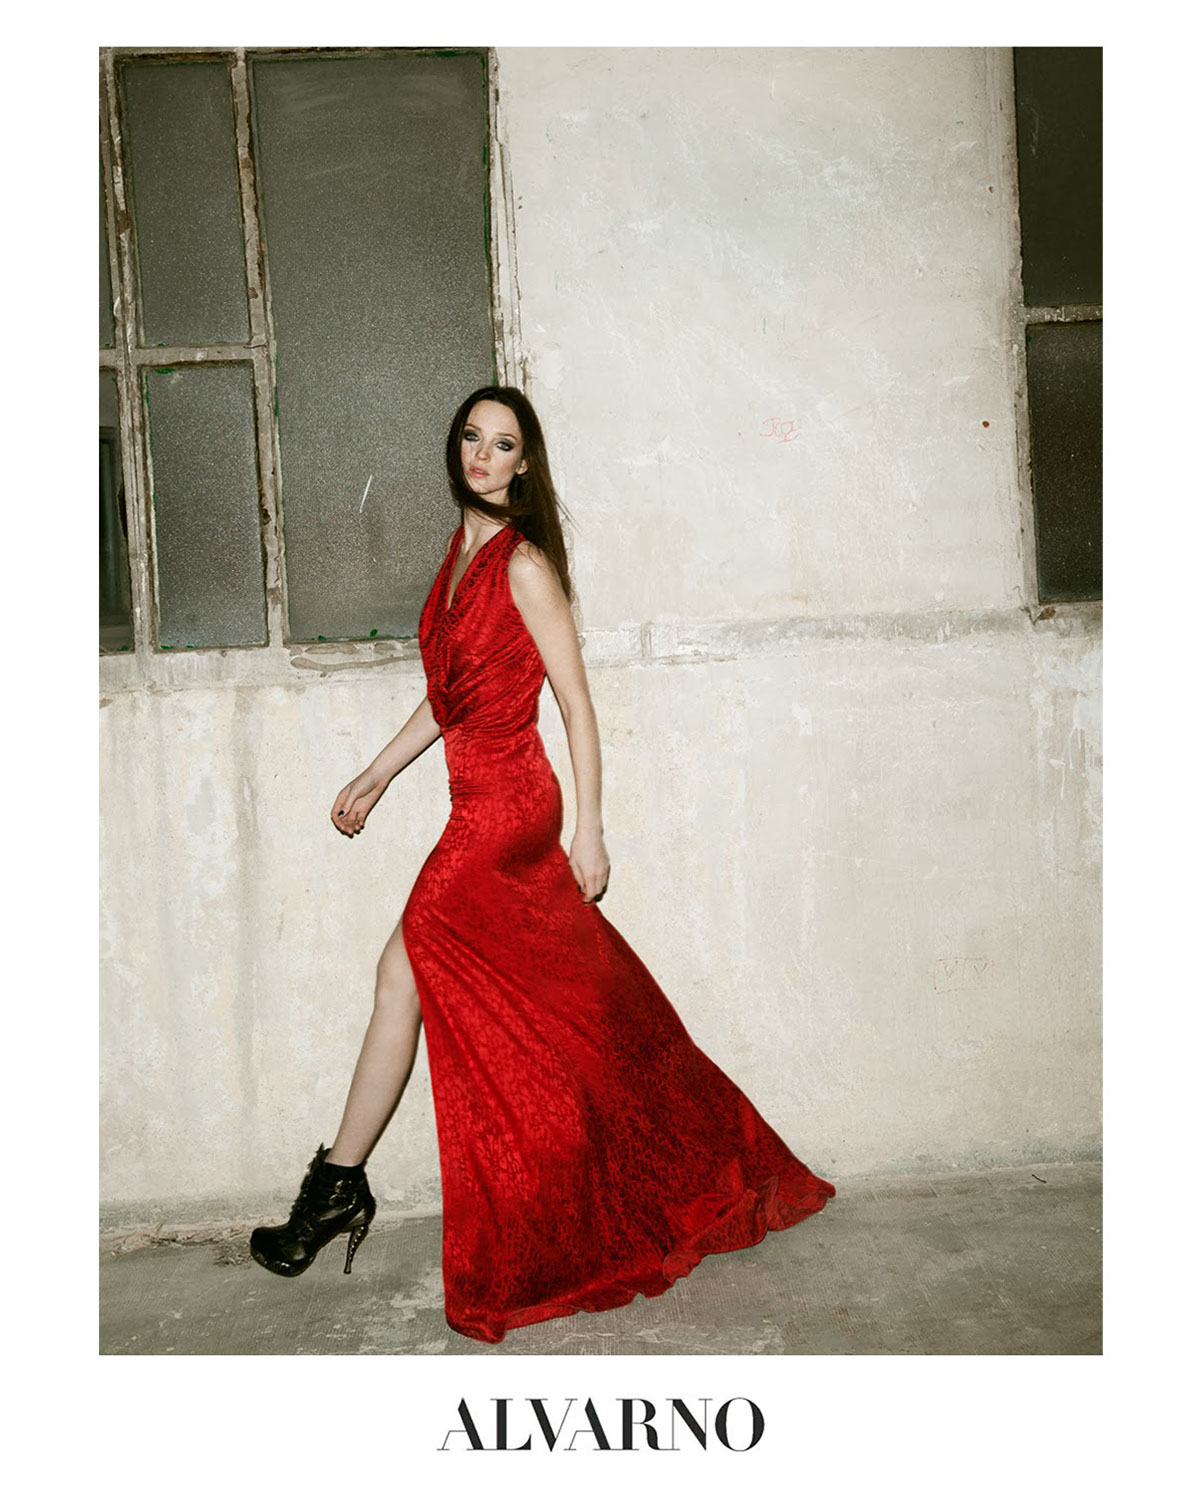 Alvarno Collection campaign fw1415 red dress design runway spain france madrid